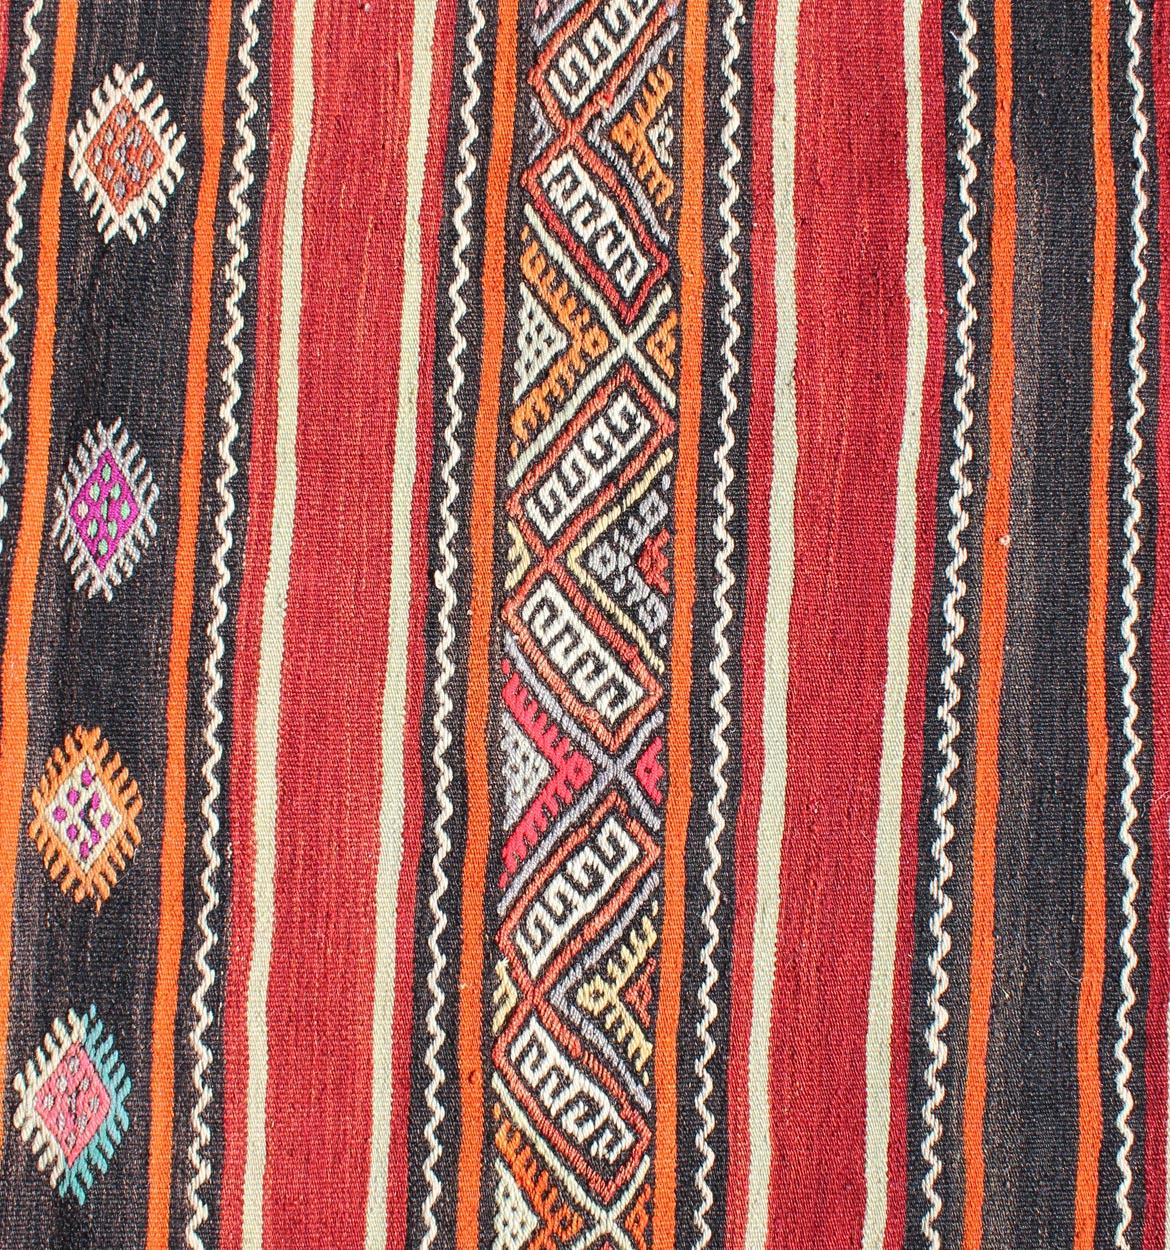 A beautiful small tribal Kilim in Red, black and multi colors, this vintage Flat Weave is done in part done with embroideries.
Measures: 4'2 x 6'